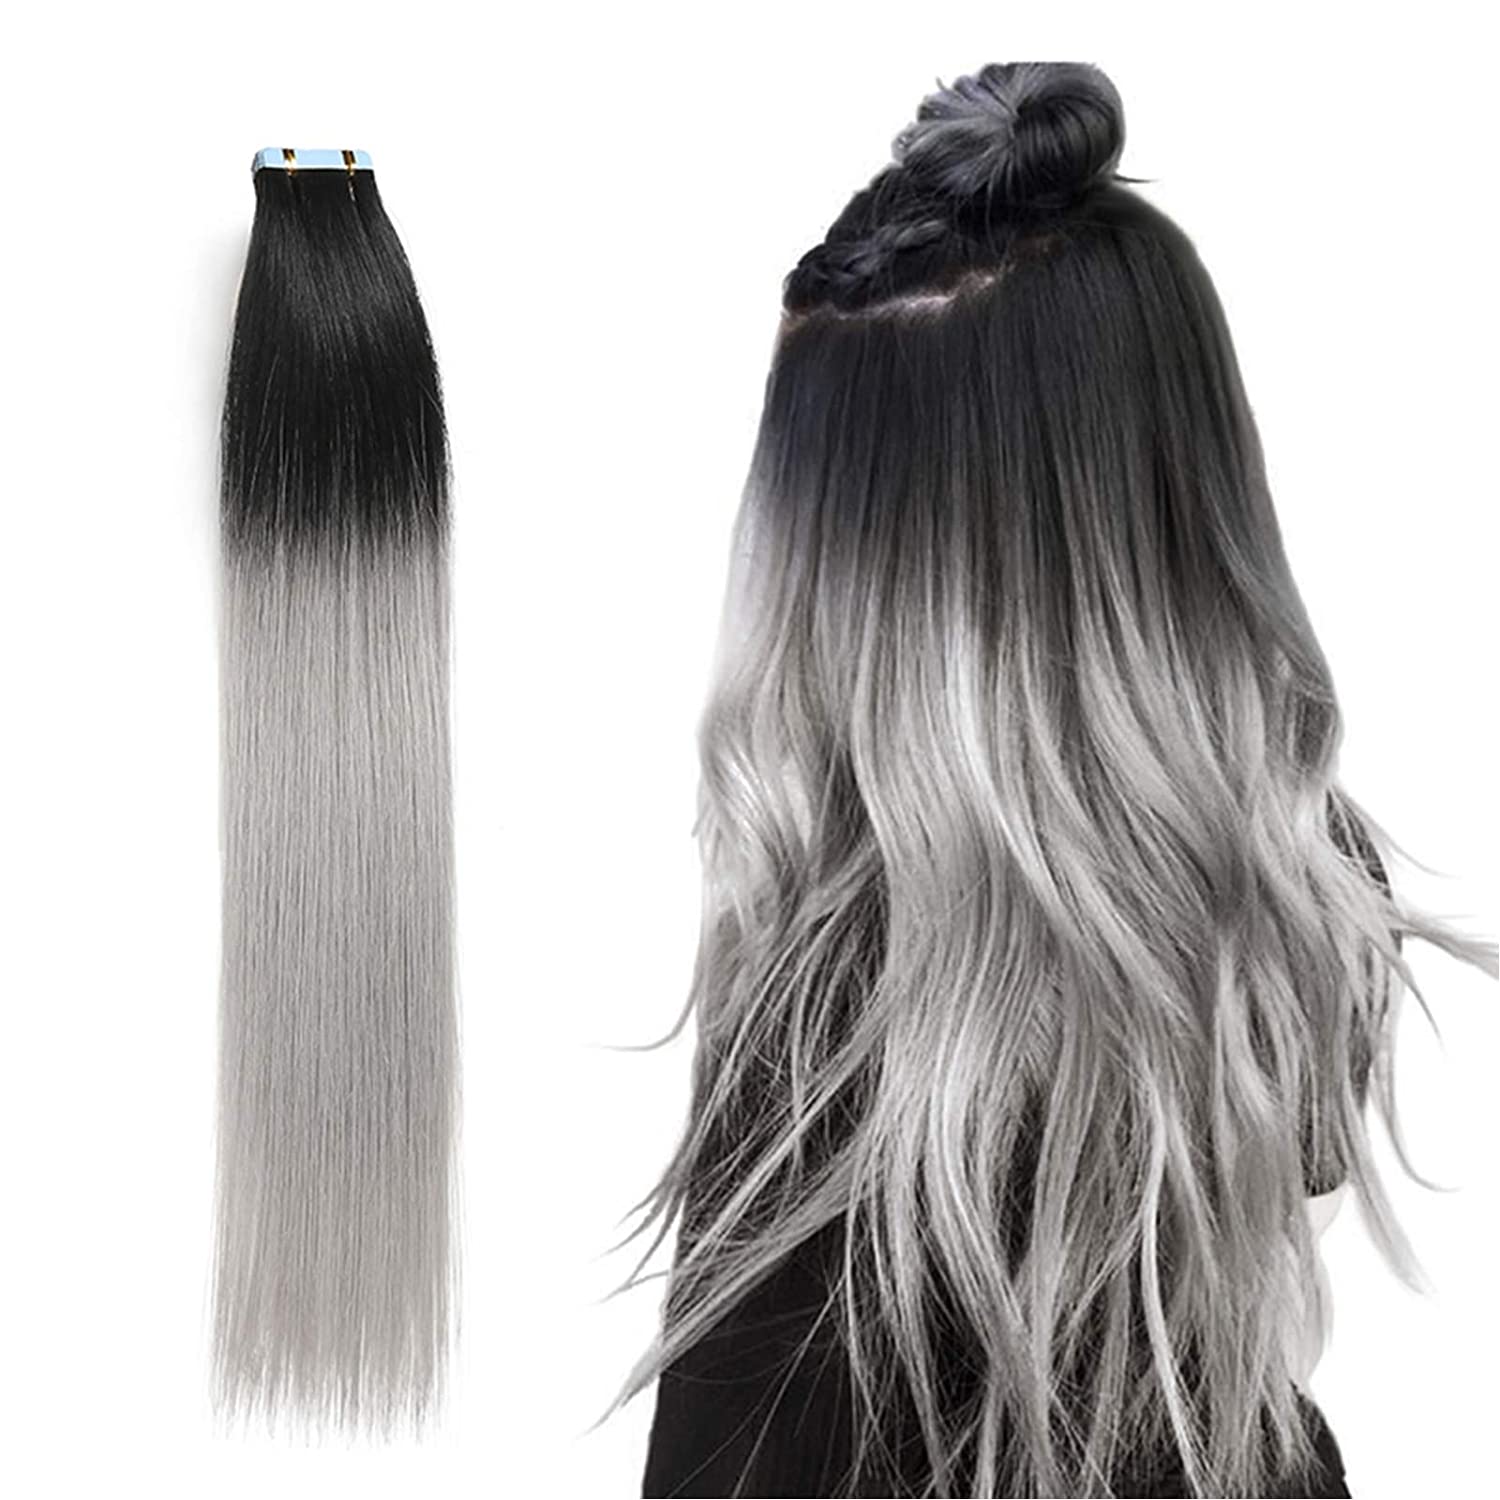 ombre-hair-extensions-new-trend-global-hair-wholesale-market